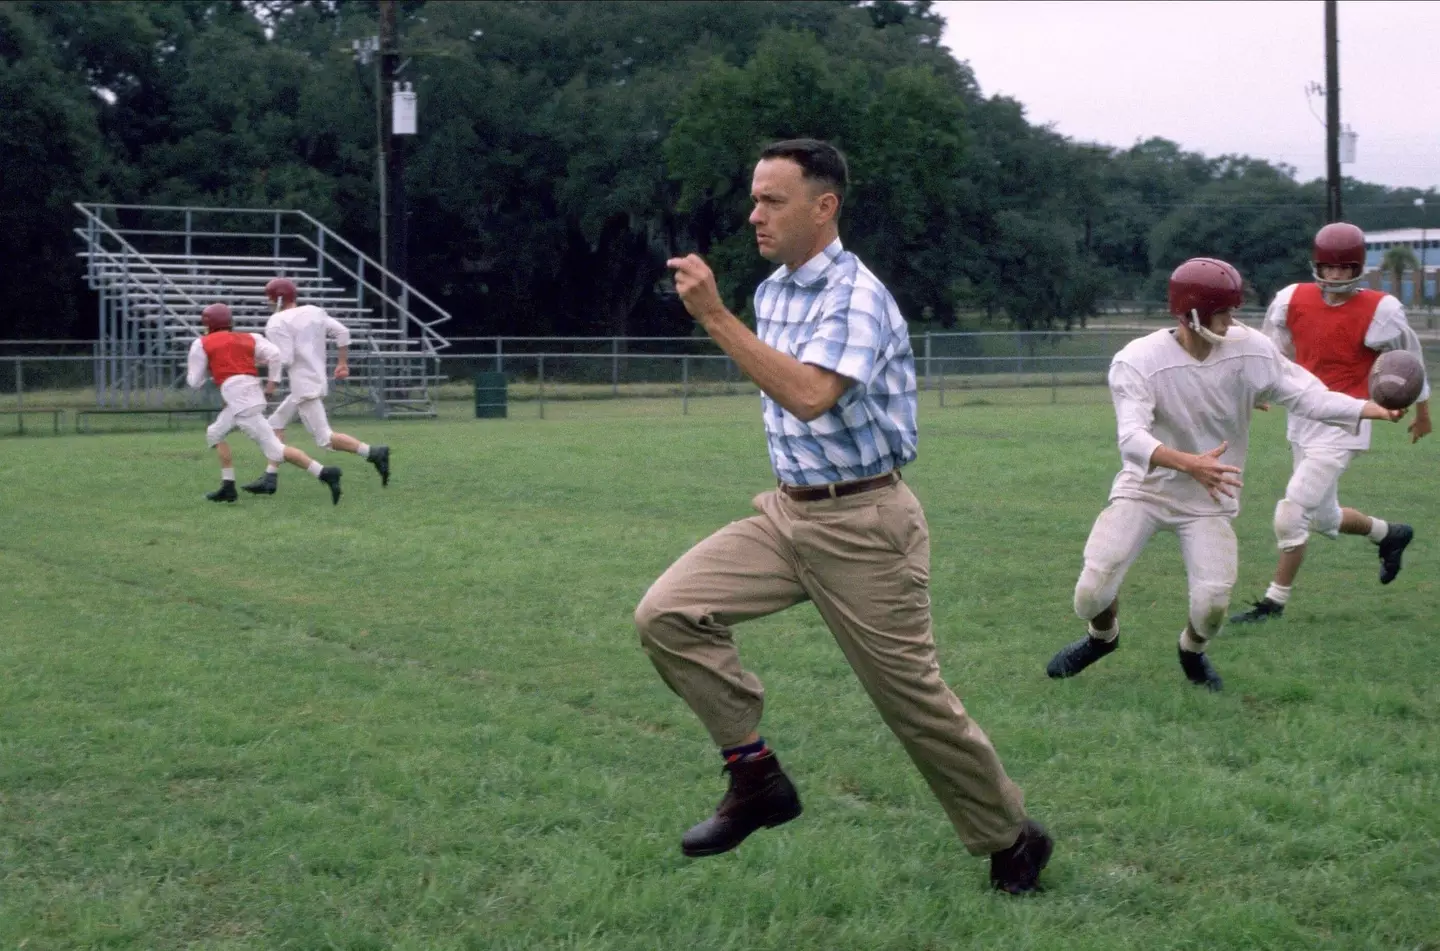 Tom Hanks made a better financial decision than Lt Dan investing Forrest Gump's money into Apple.